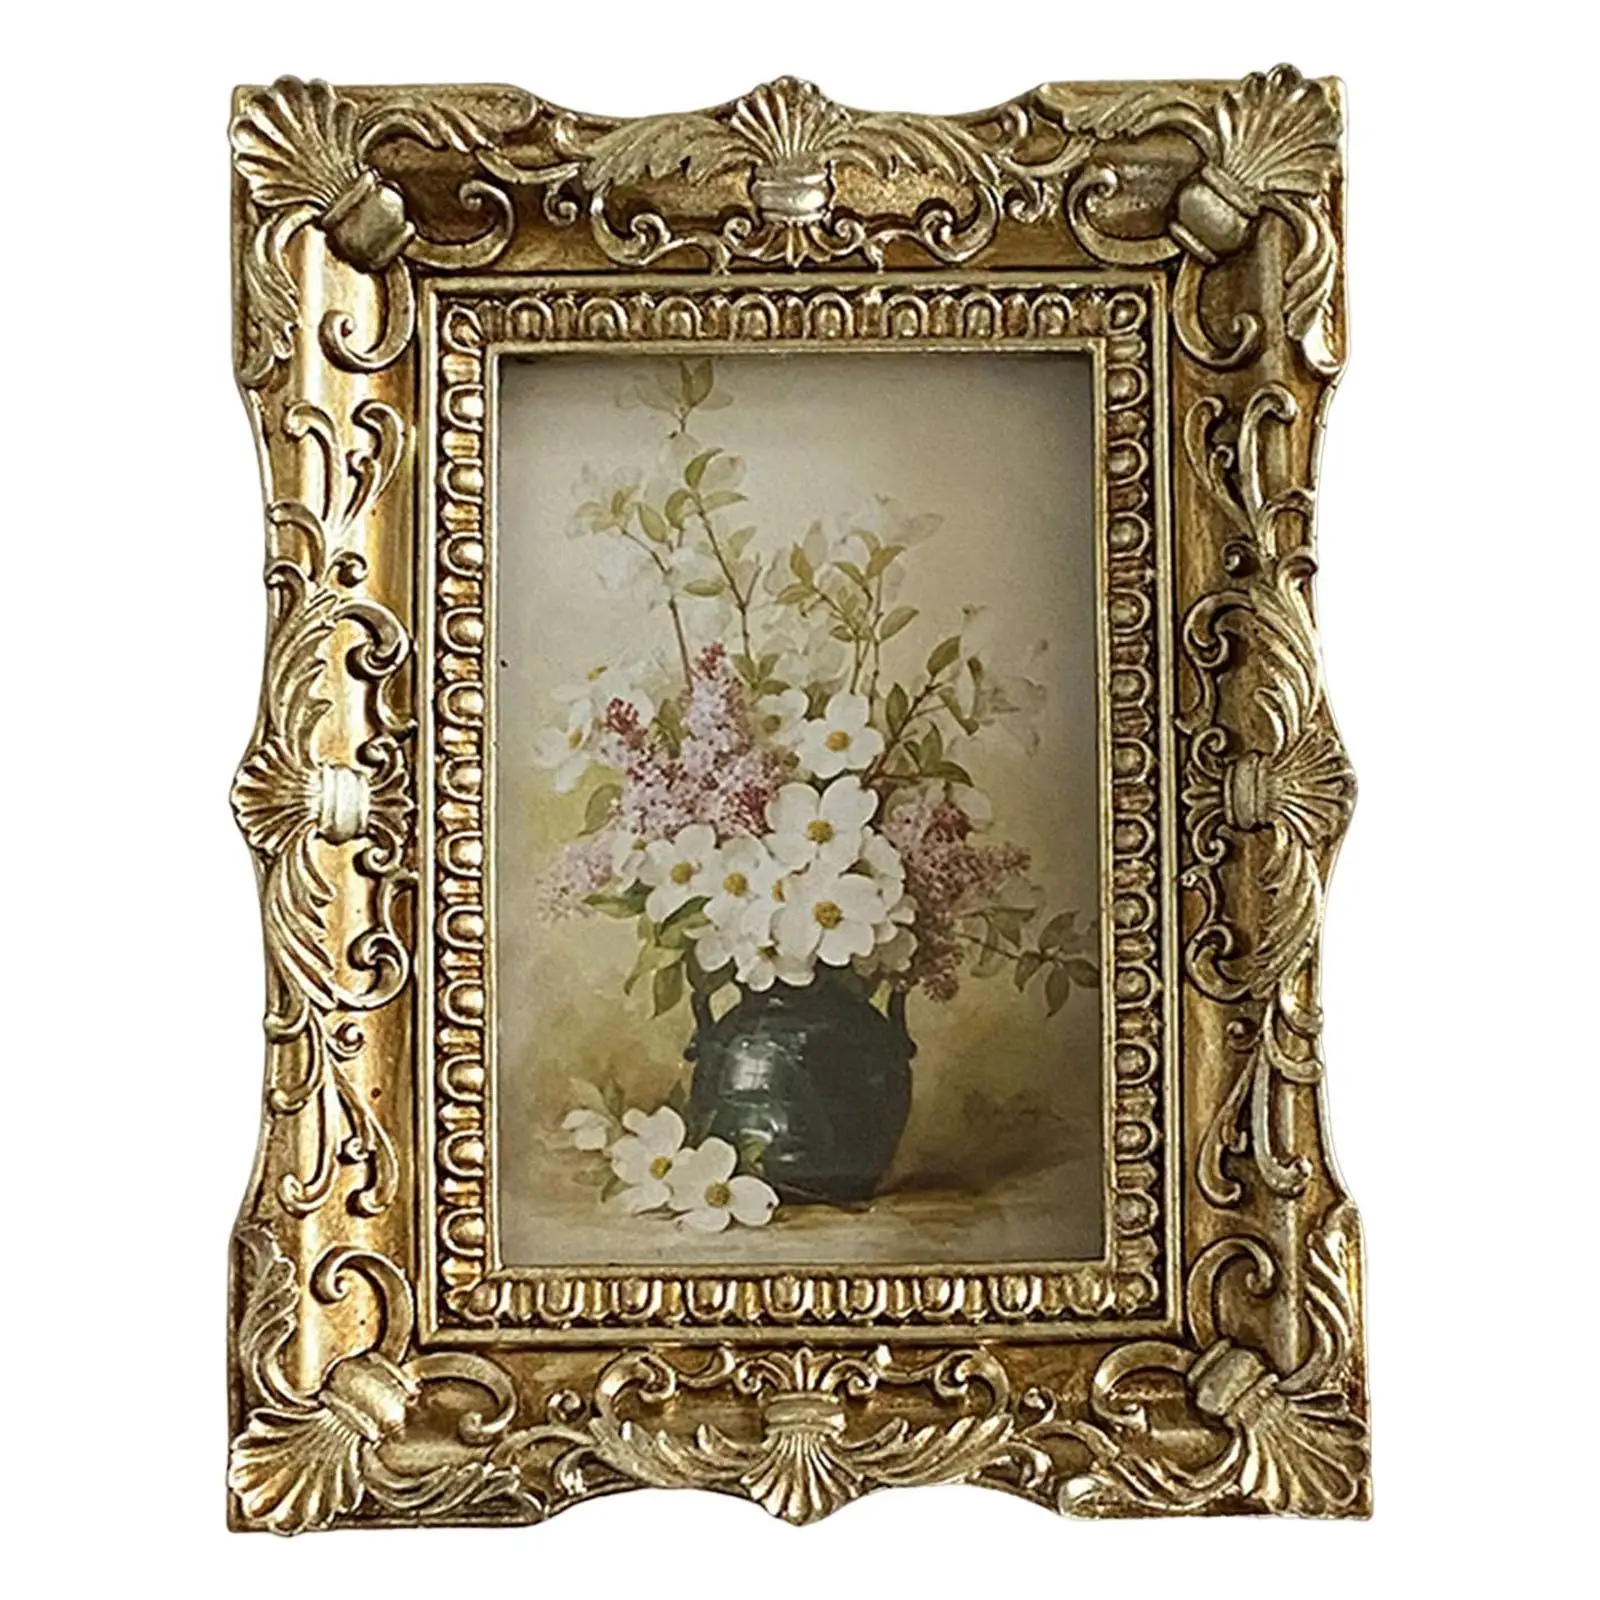 Retro Style Photo Frame Picture Holder Ornate for Bedroom Hallway Decoration